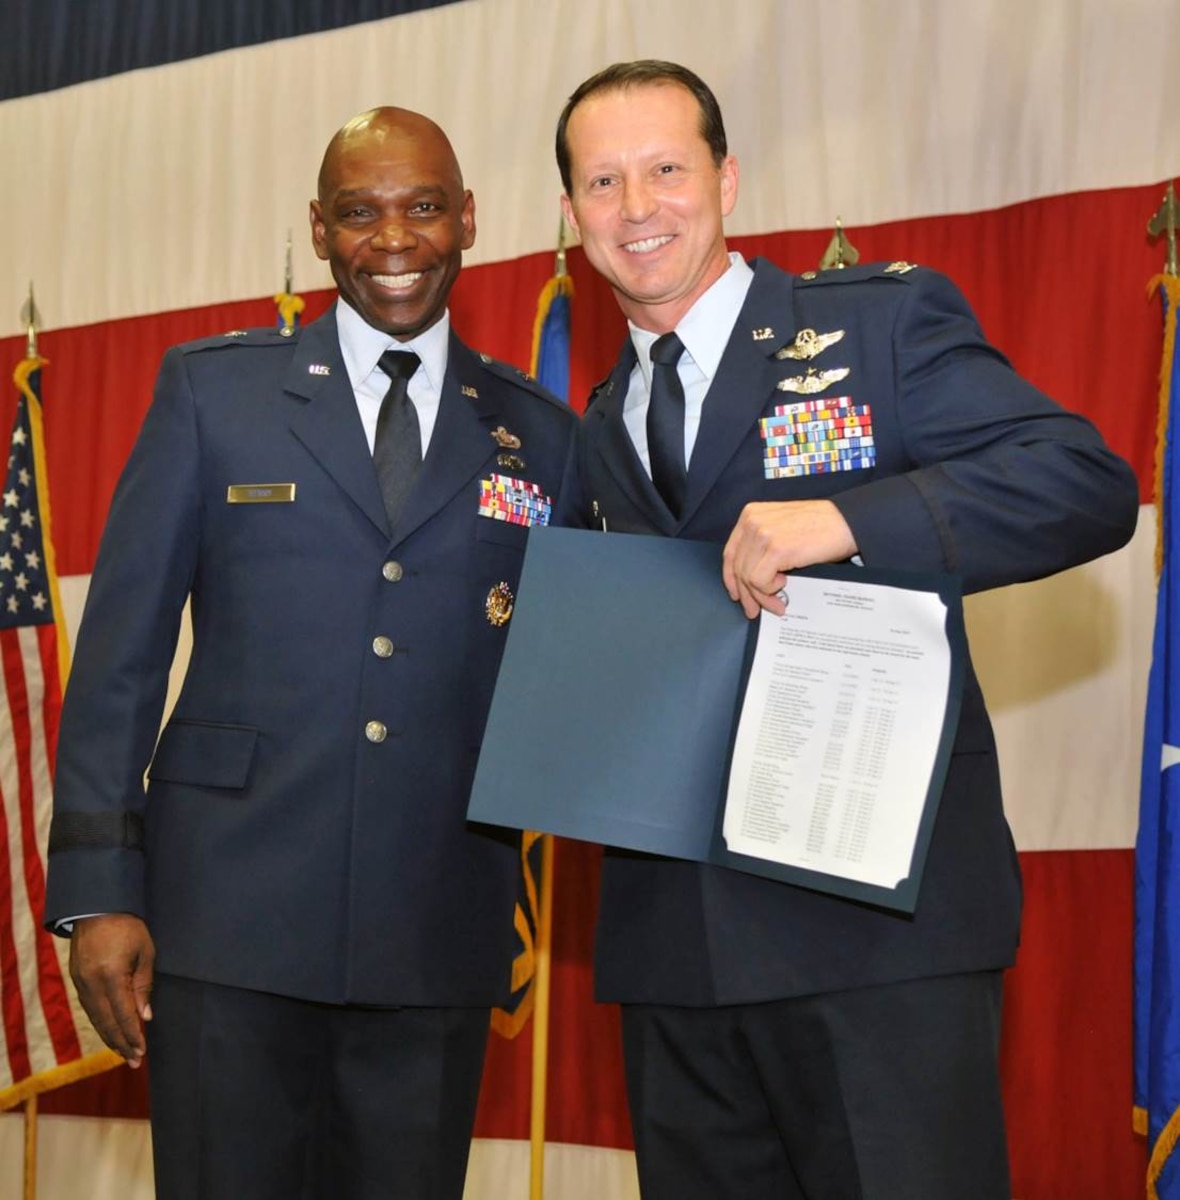 Nevada Air Guard Brig. Gen. Ondra Berry, left, presents Col. Karl Stark with the Outstanding Unit Award for the 152nd Airlift Wing. 152nd Airlift Wing was awarded a U.S. Air Force Outstanding Unit Award for the time period from October 2012 to October 2014. The U.S. Air Force announced the award earlier this year, but the Nevada Air National Guard publically announced it on Sunday during its annual awards ceremony at the base in Reno.